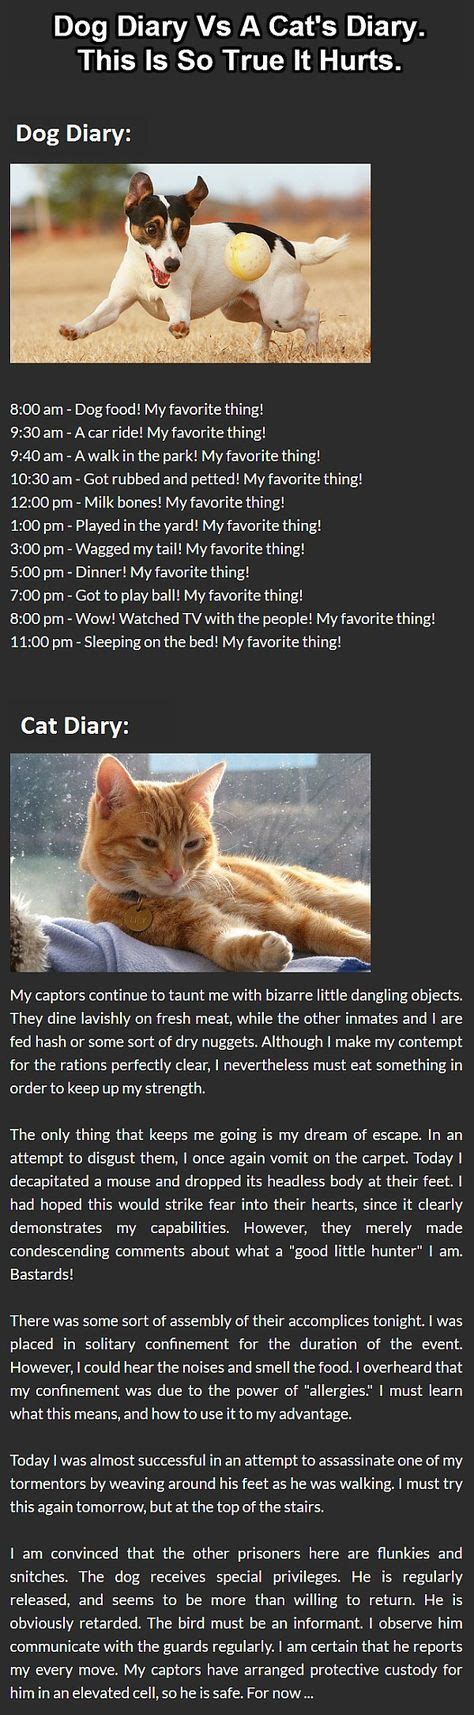 Cats Vs Dogs This Is The Best Diary Comparison Ever Cats Vs Dogs